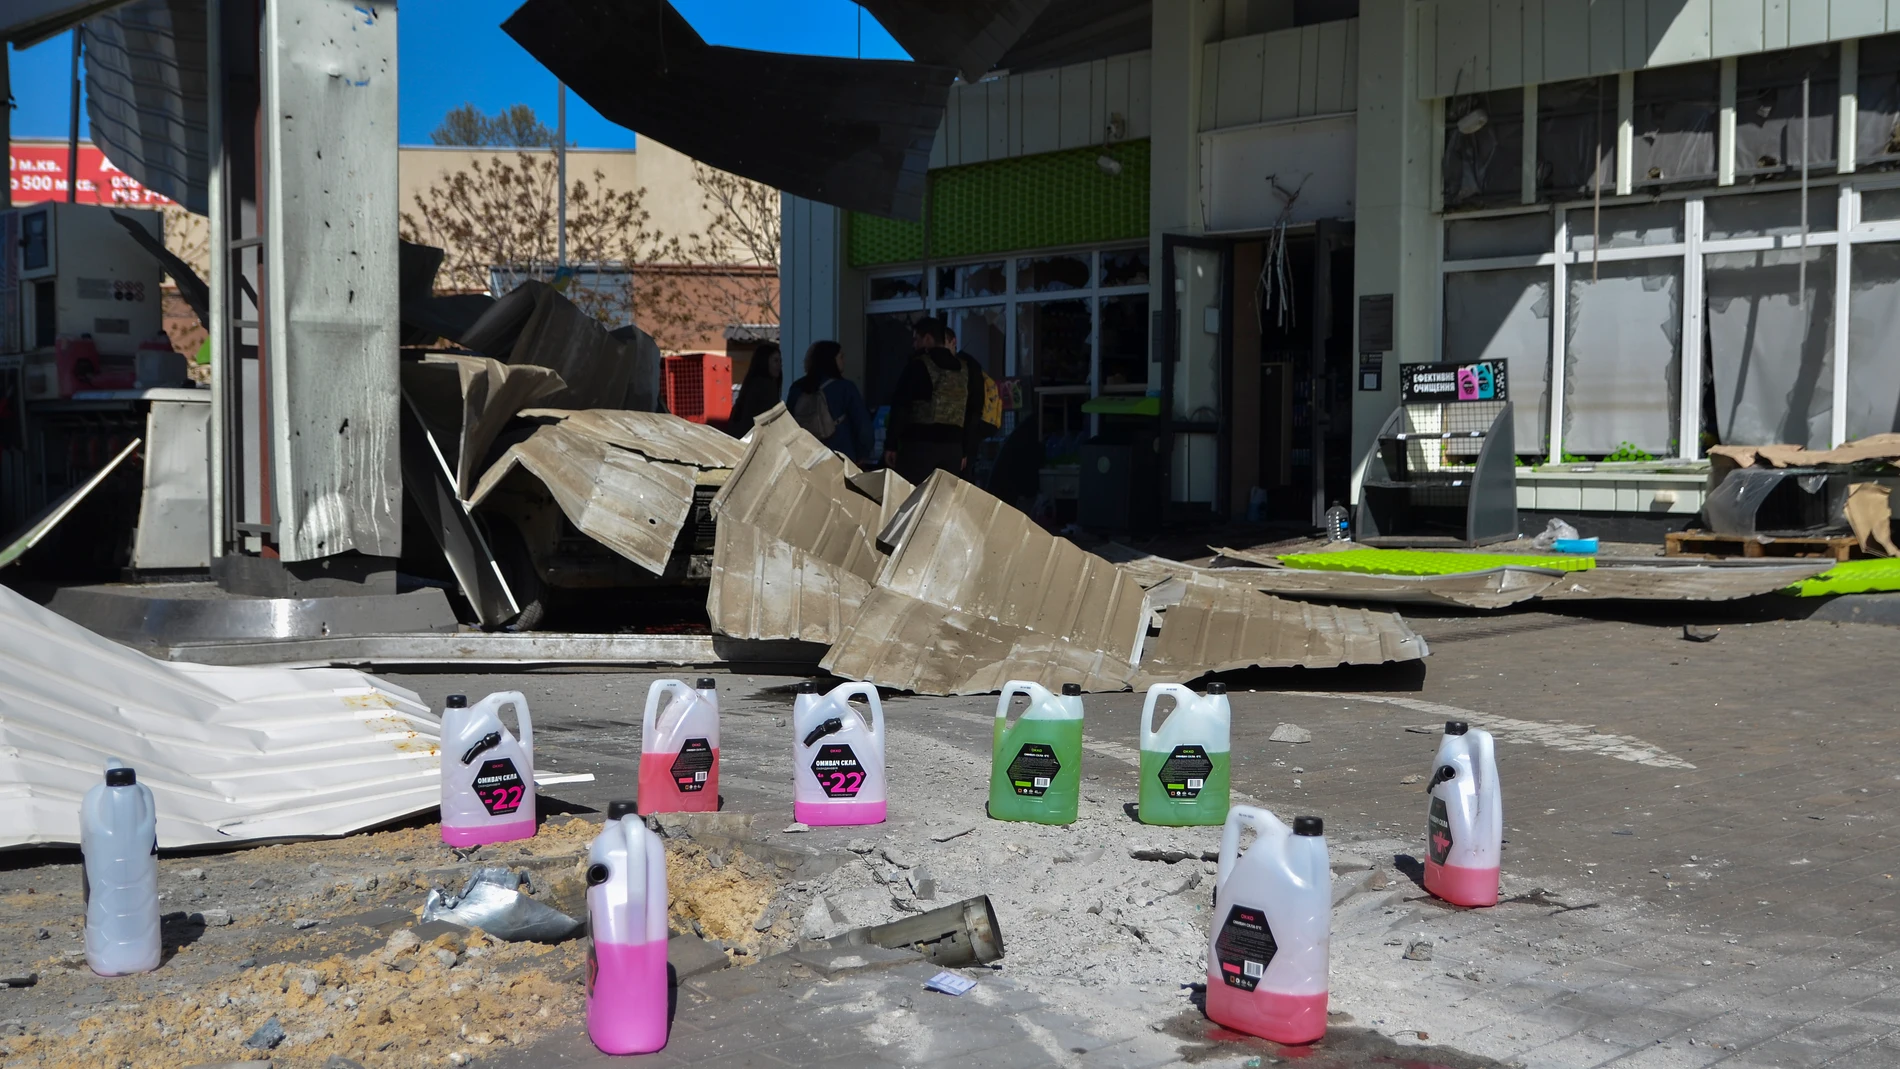 Kherson (Ukraine), 03/05/2023.- A part of rocket protected by jerrycans with antifreeze liquid in front of shelled gas station in Kherson, Ukraine, 03 May 2023 amid the Russian invasion. Russian troops struck the construction hypermarket, railway station, gas station and residential area of Kherson. At least 16 people were killed and 28 injured by Russian shelling of Kherson region, on 03 May, Roman Mrochko, Head of the Kherson City Military Administration reported. (Rusia, Ucrania) EFE/EPA/IVAN ANTYPENKO 